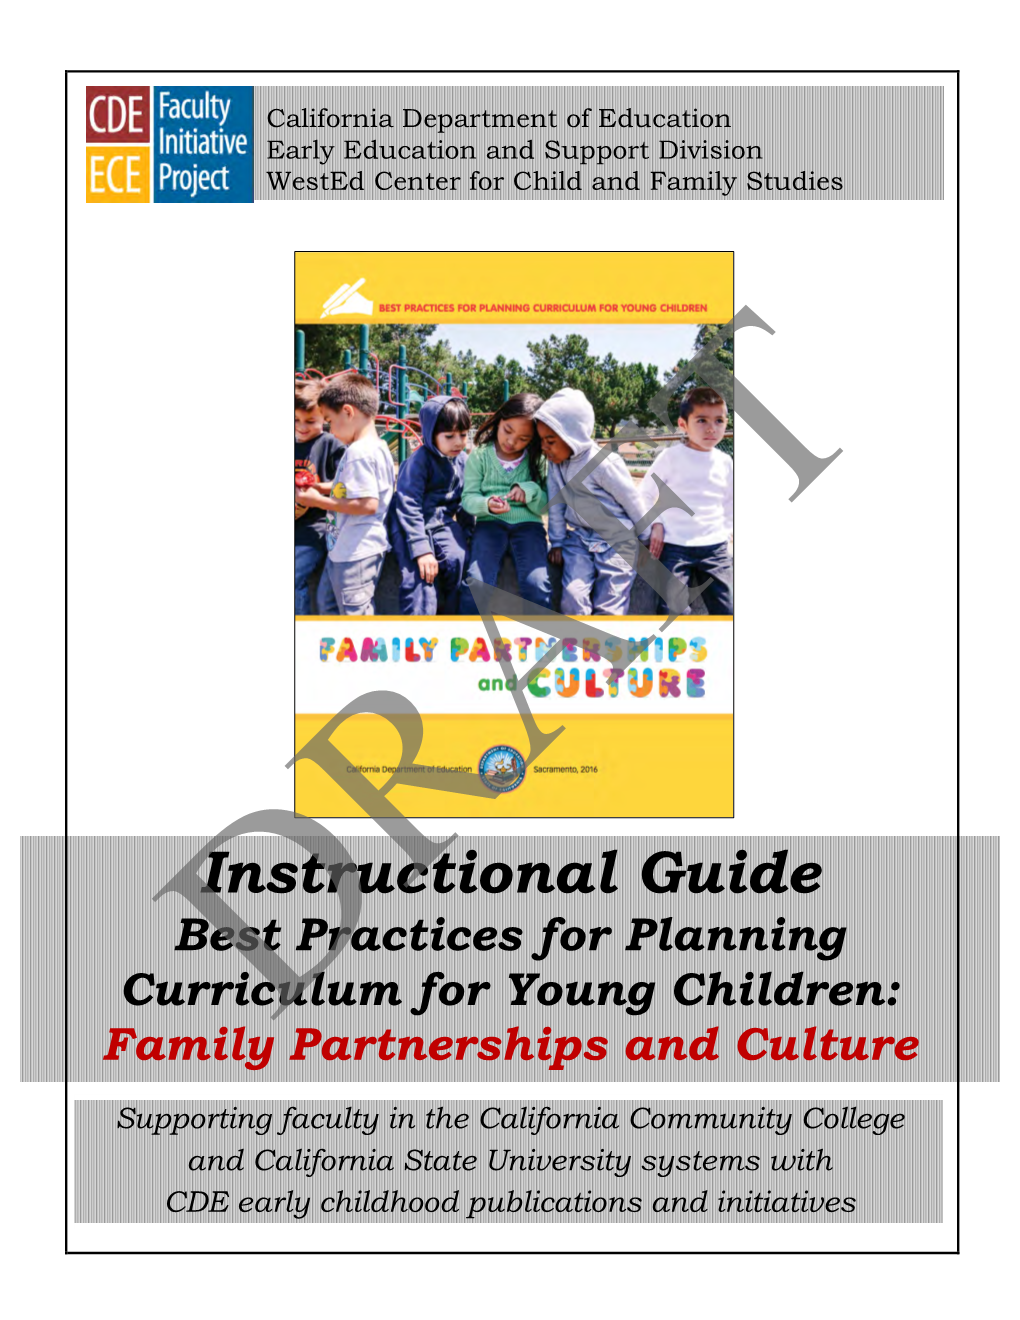 Instructional Guide for Family Partnerships and Culture DRAFT February 1, 2018